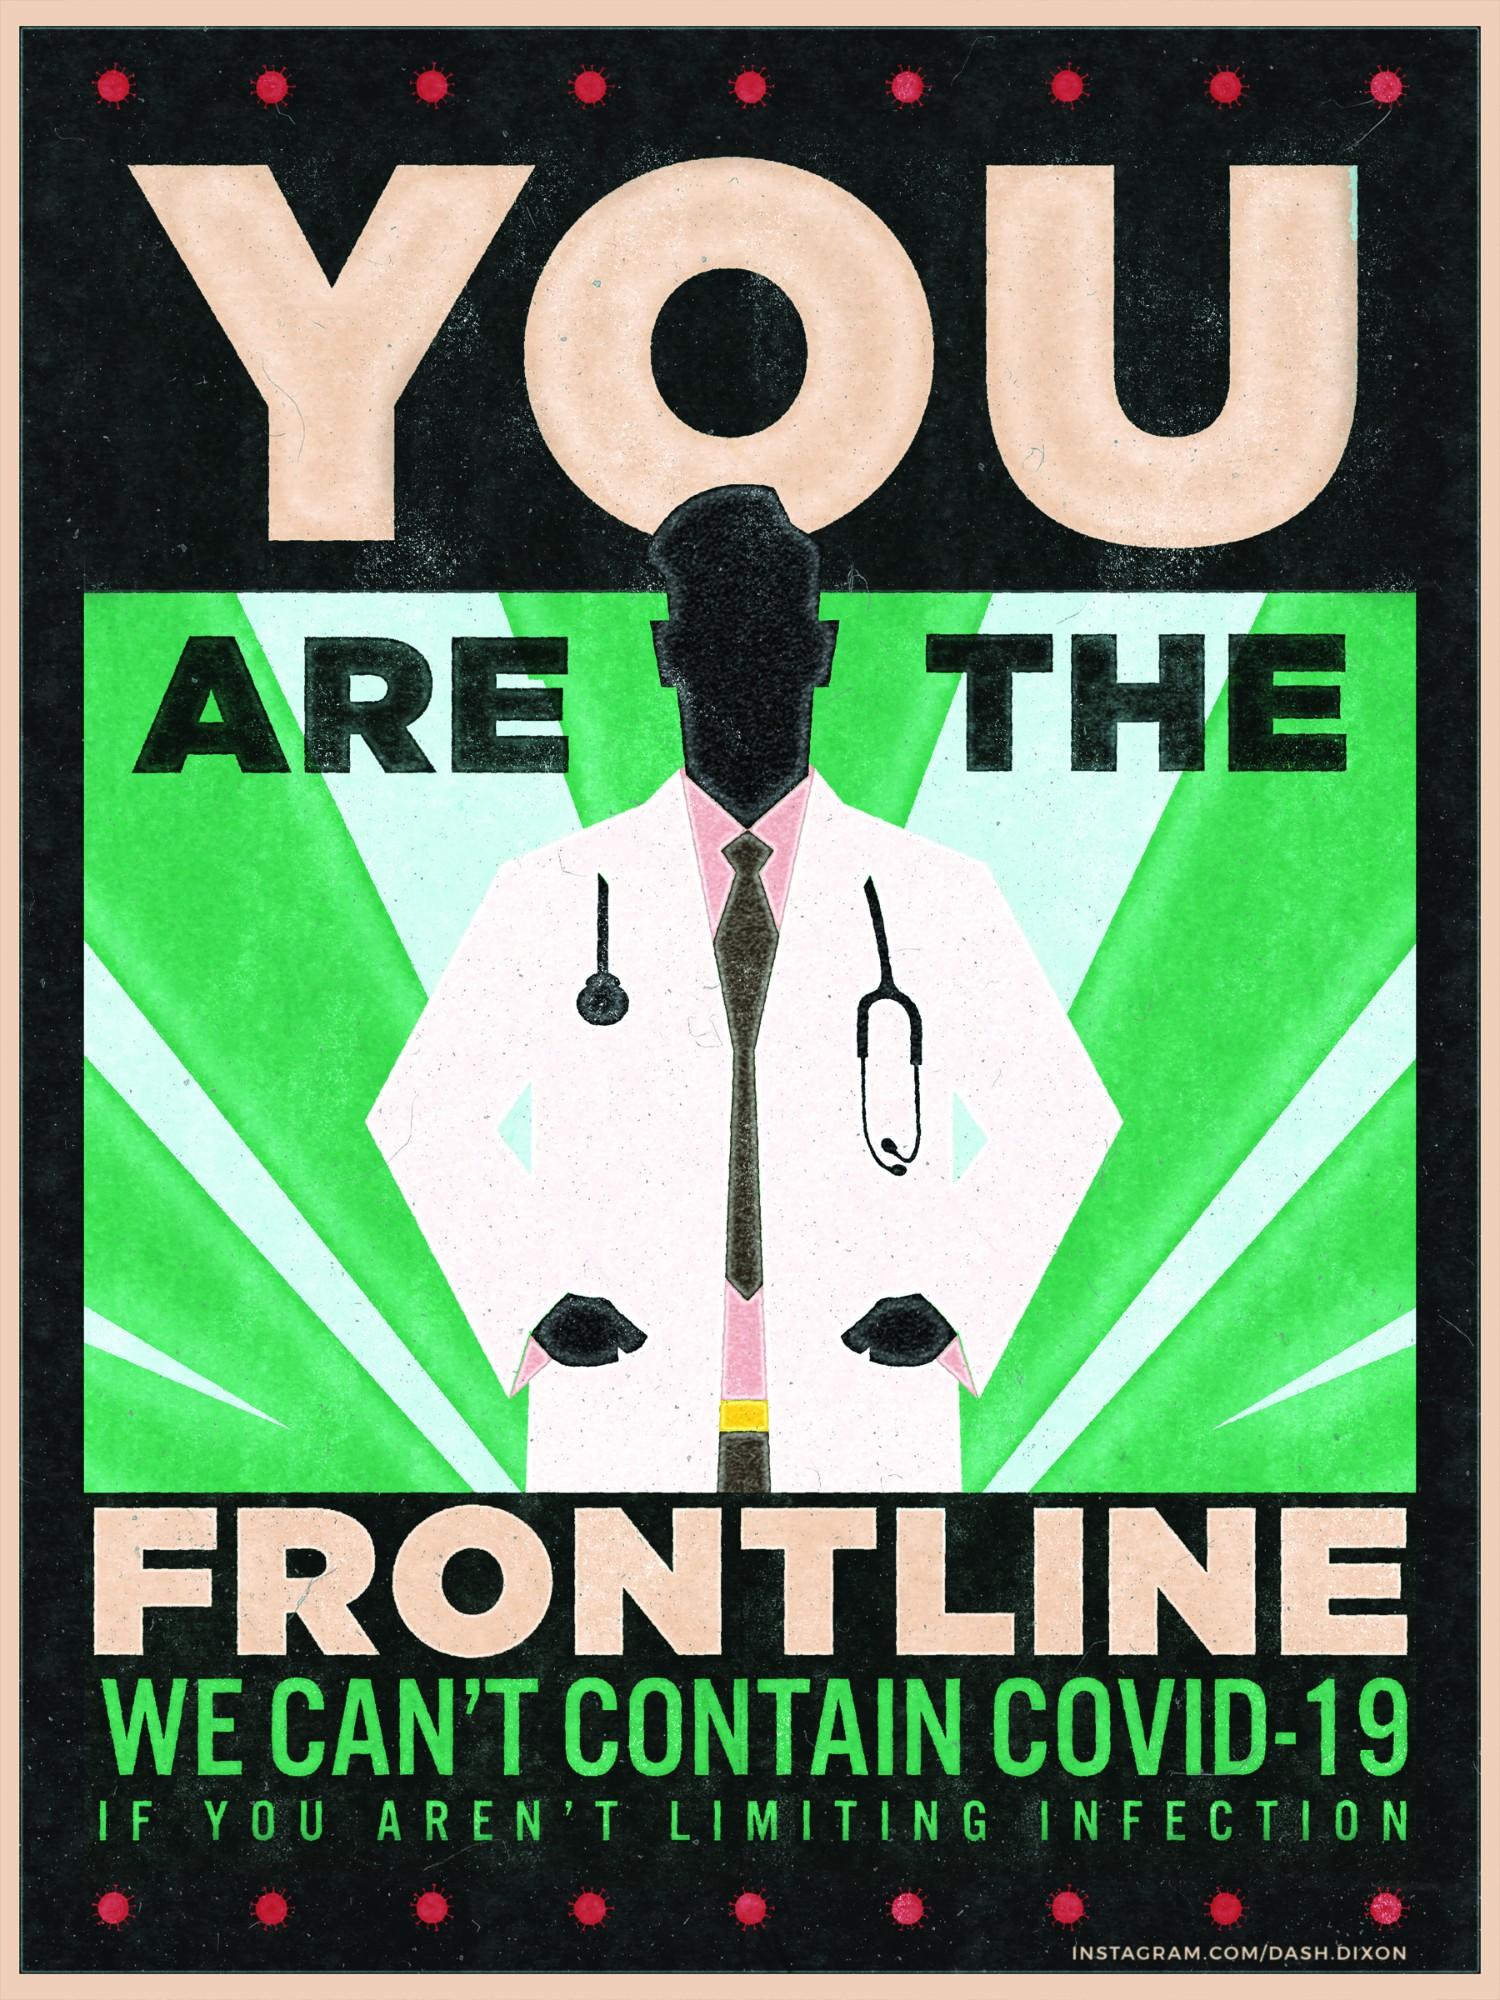 convid-19 containment propaganda poster that reads "you are the frontline" with an outline of a doctor